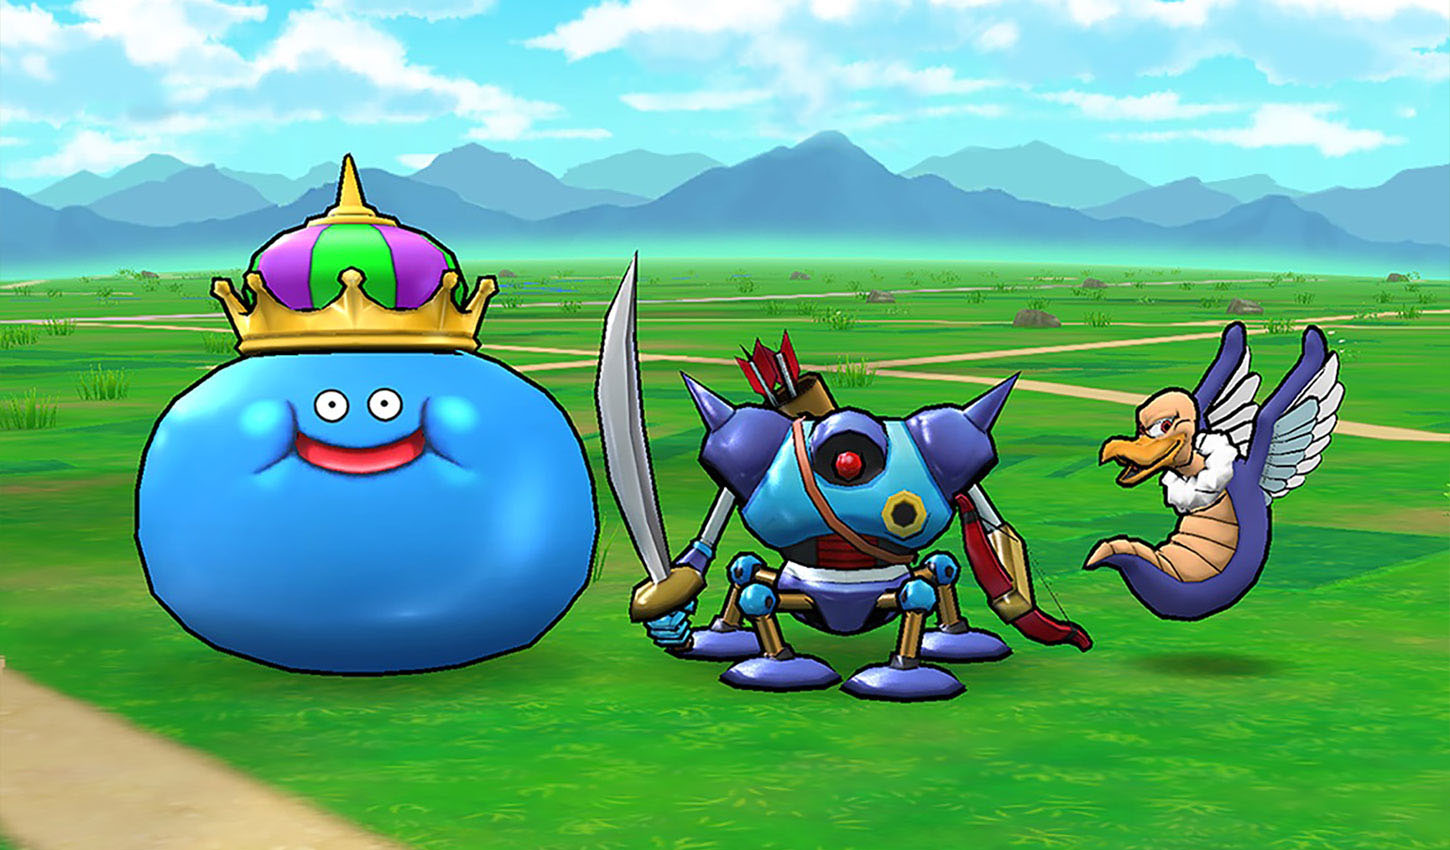 Dragon Quest Walk Takes Flight in Japan, Earning $86 Million in Its First Month